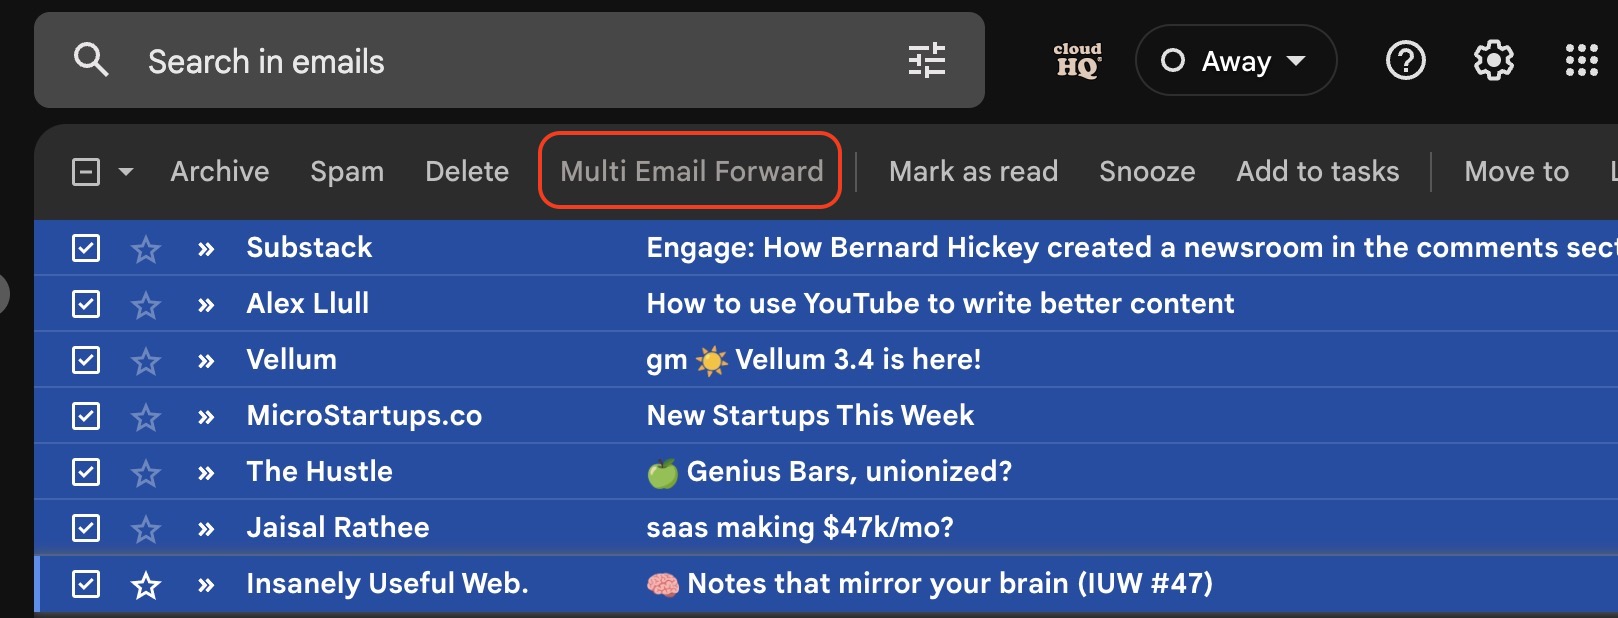 multi email forward gmail